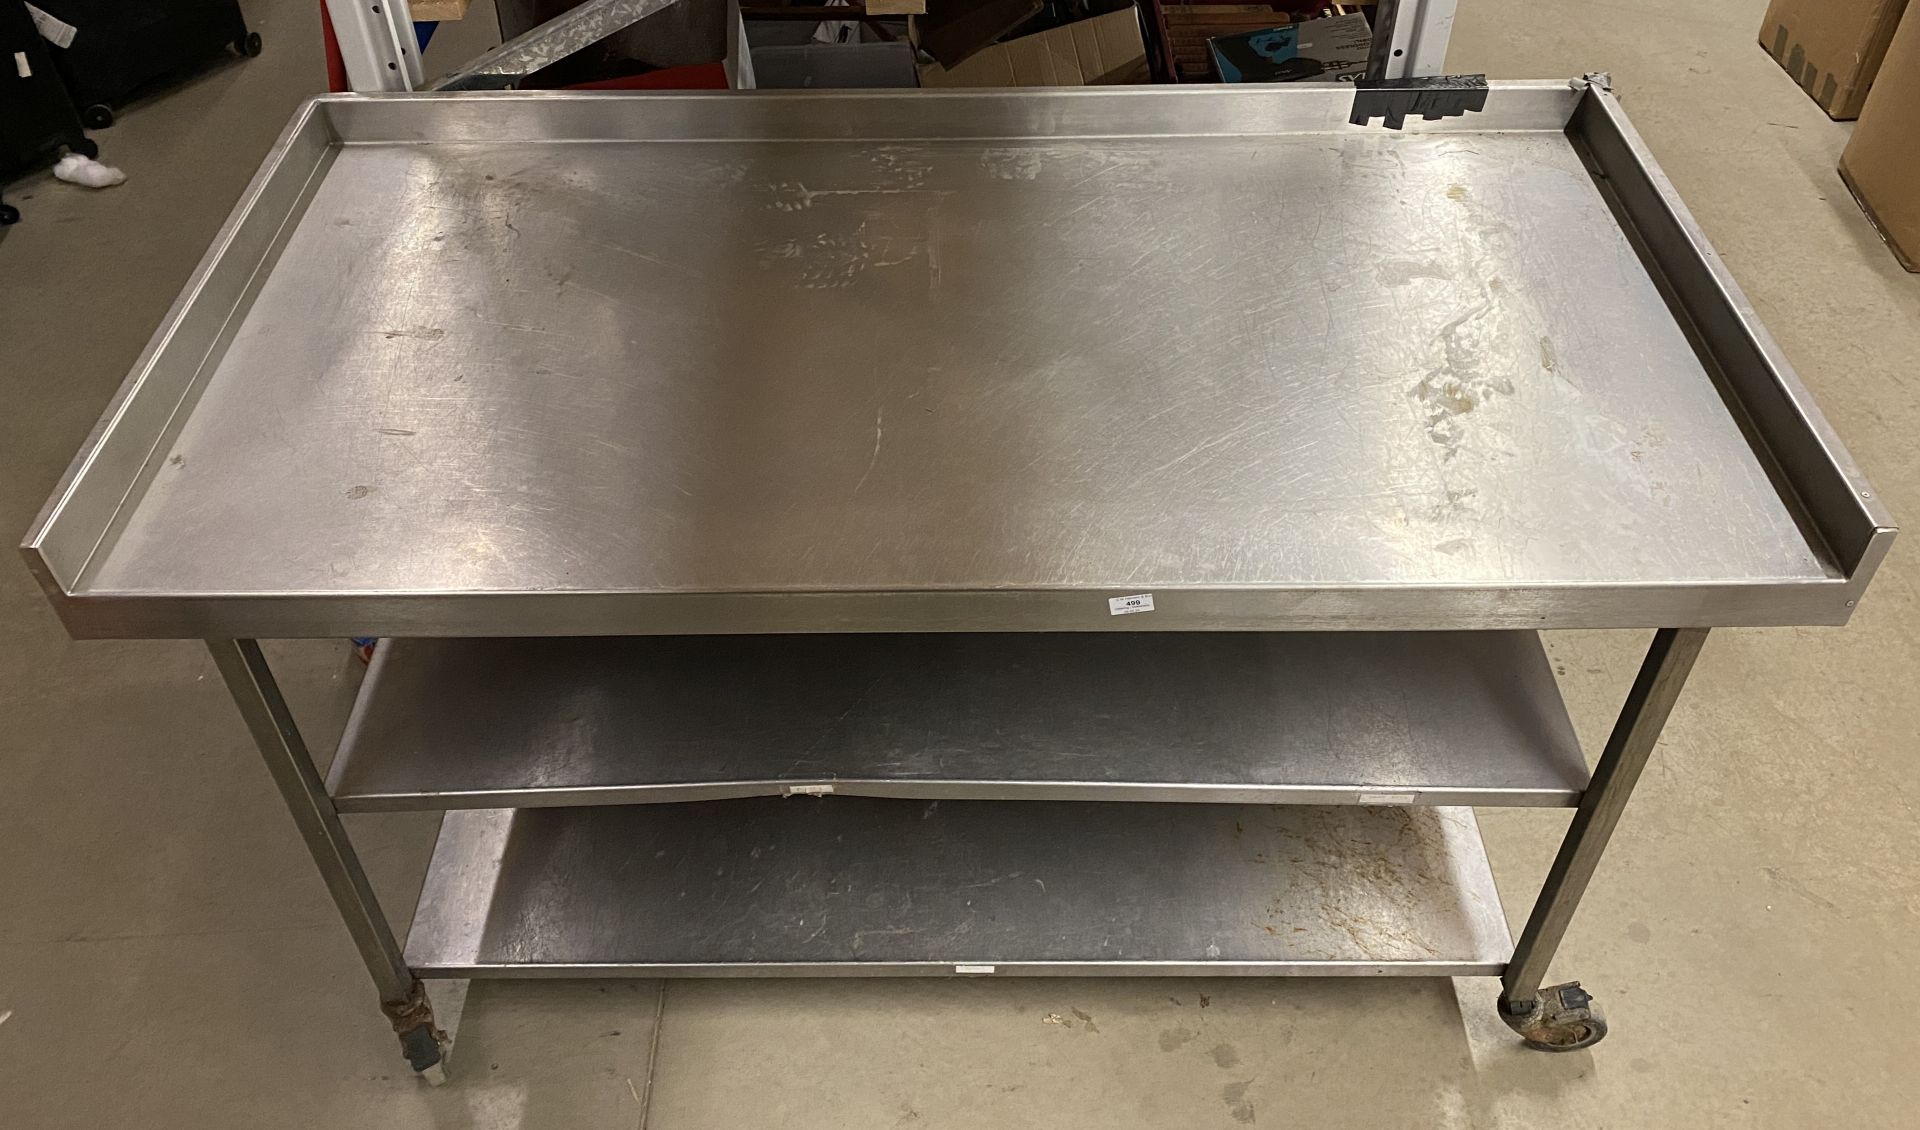 Stainless steel mobile 3-shelf preparation unit, - Image 2 of 2